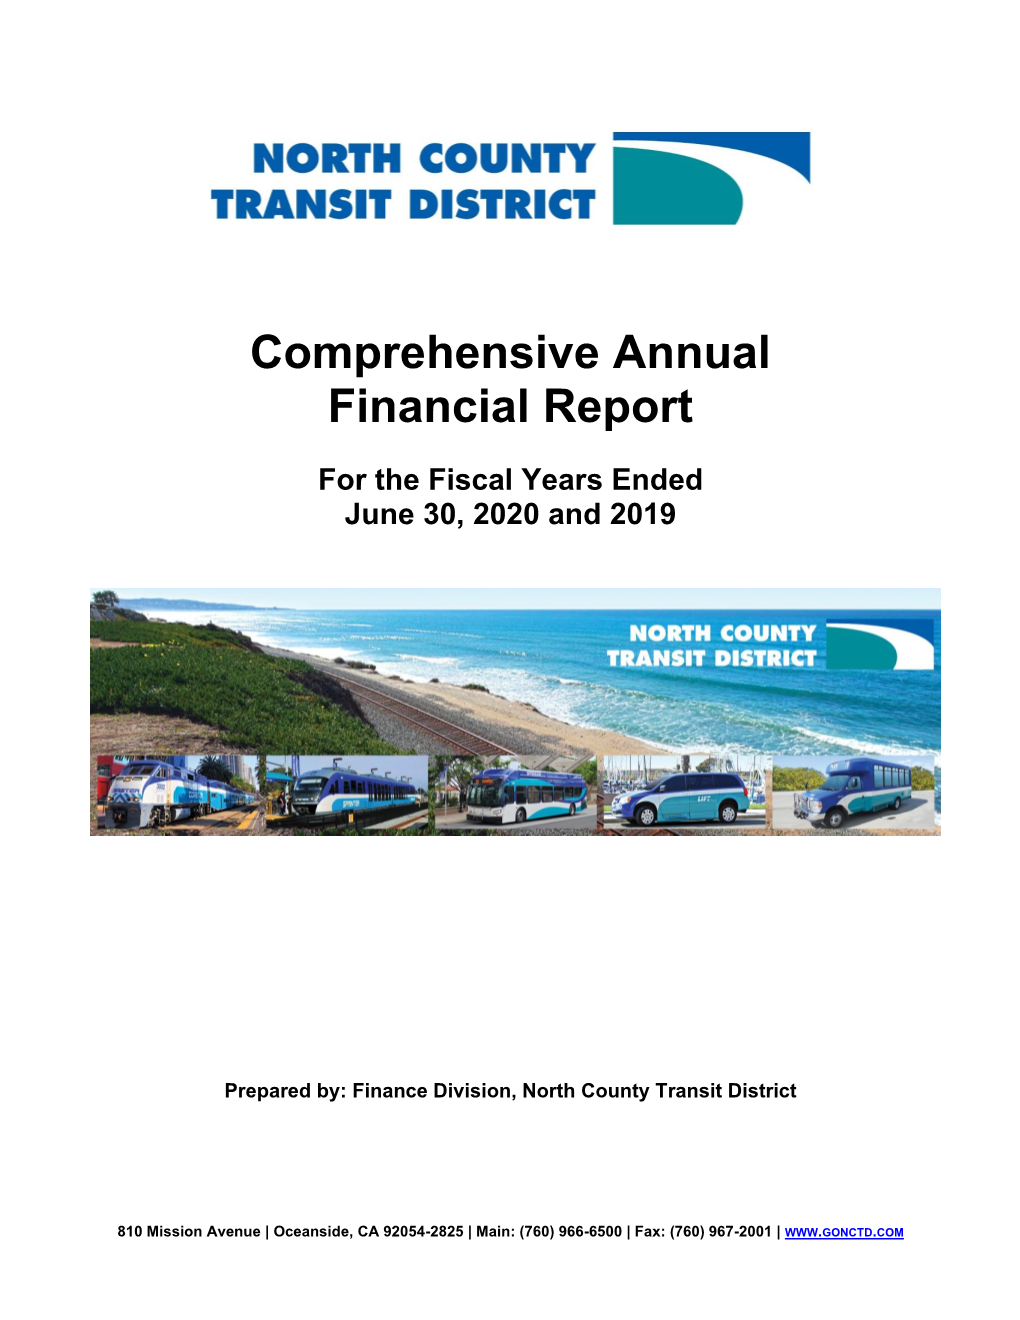 NCTD Comprehensive Annual Financial Report FY2020-FY2019